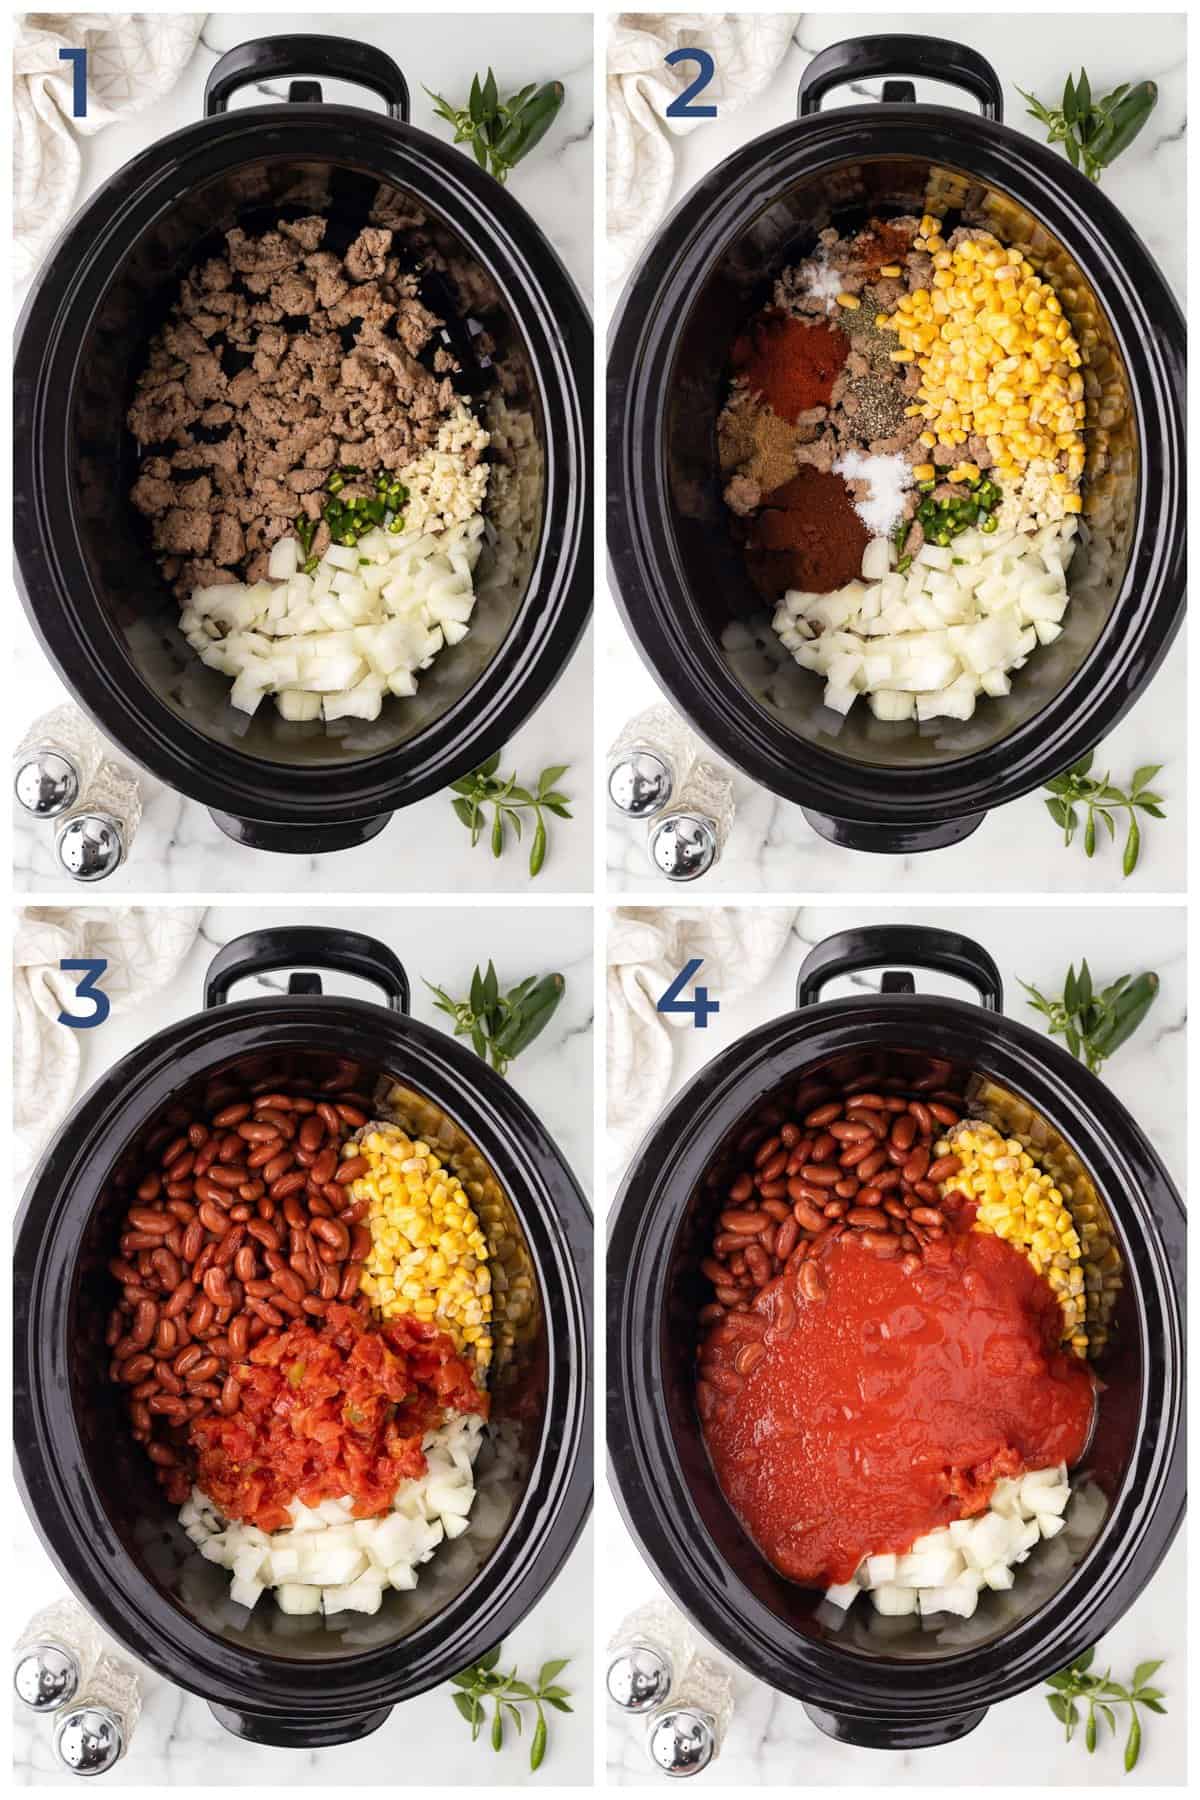 Slow cooker with ingredients for chili - turkey, beans, onion, garlic, tomatoes, corn, seasoning